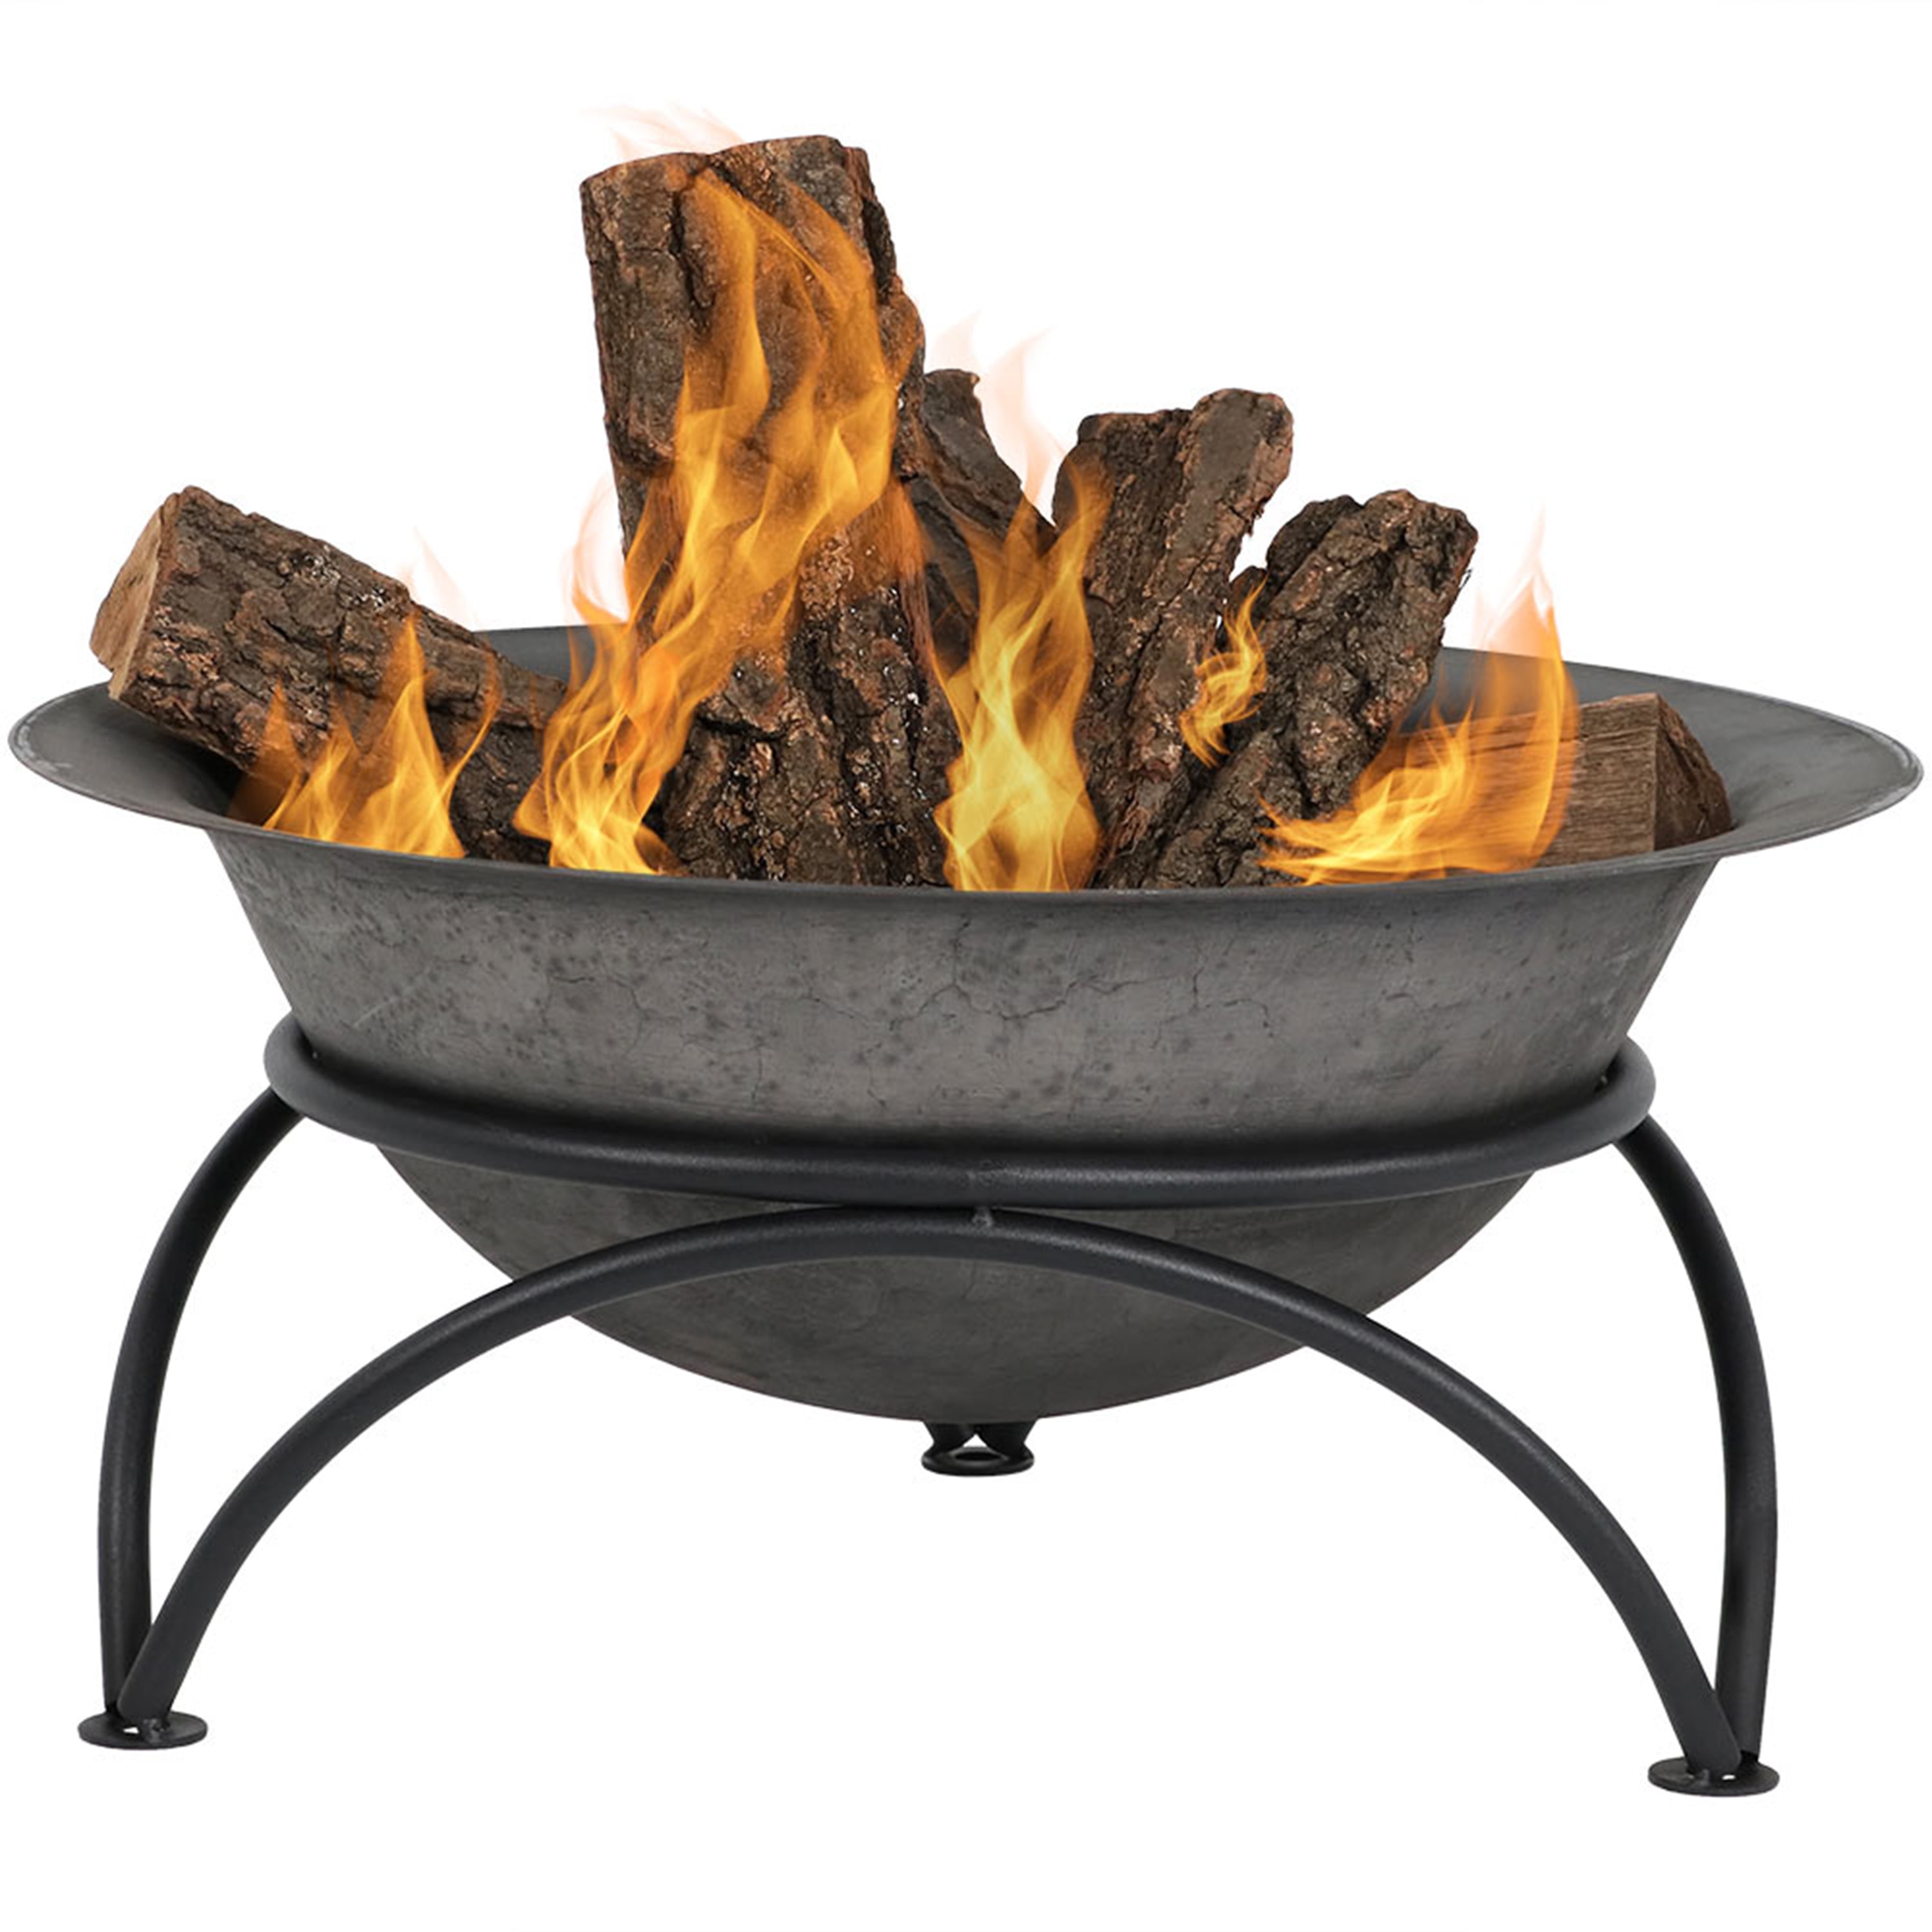 Sunnydaze Rustic Steel-Colored Cast Iron Fire Pit Bowl with 